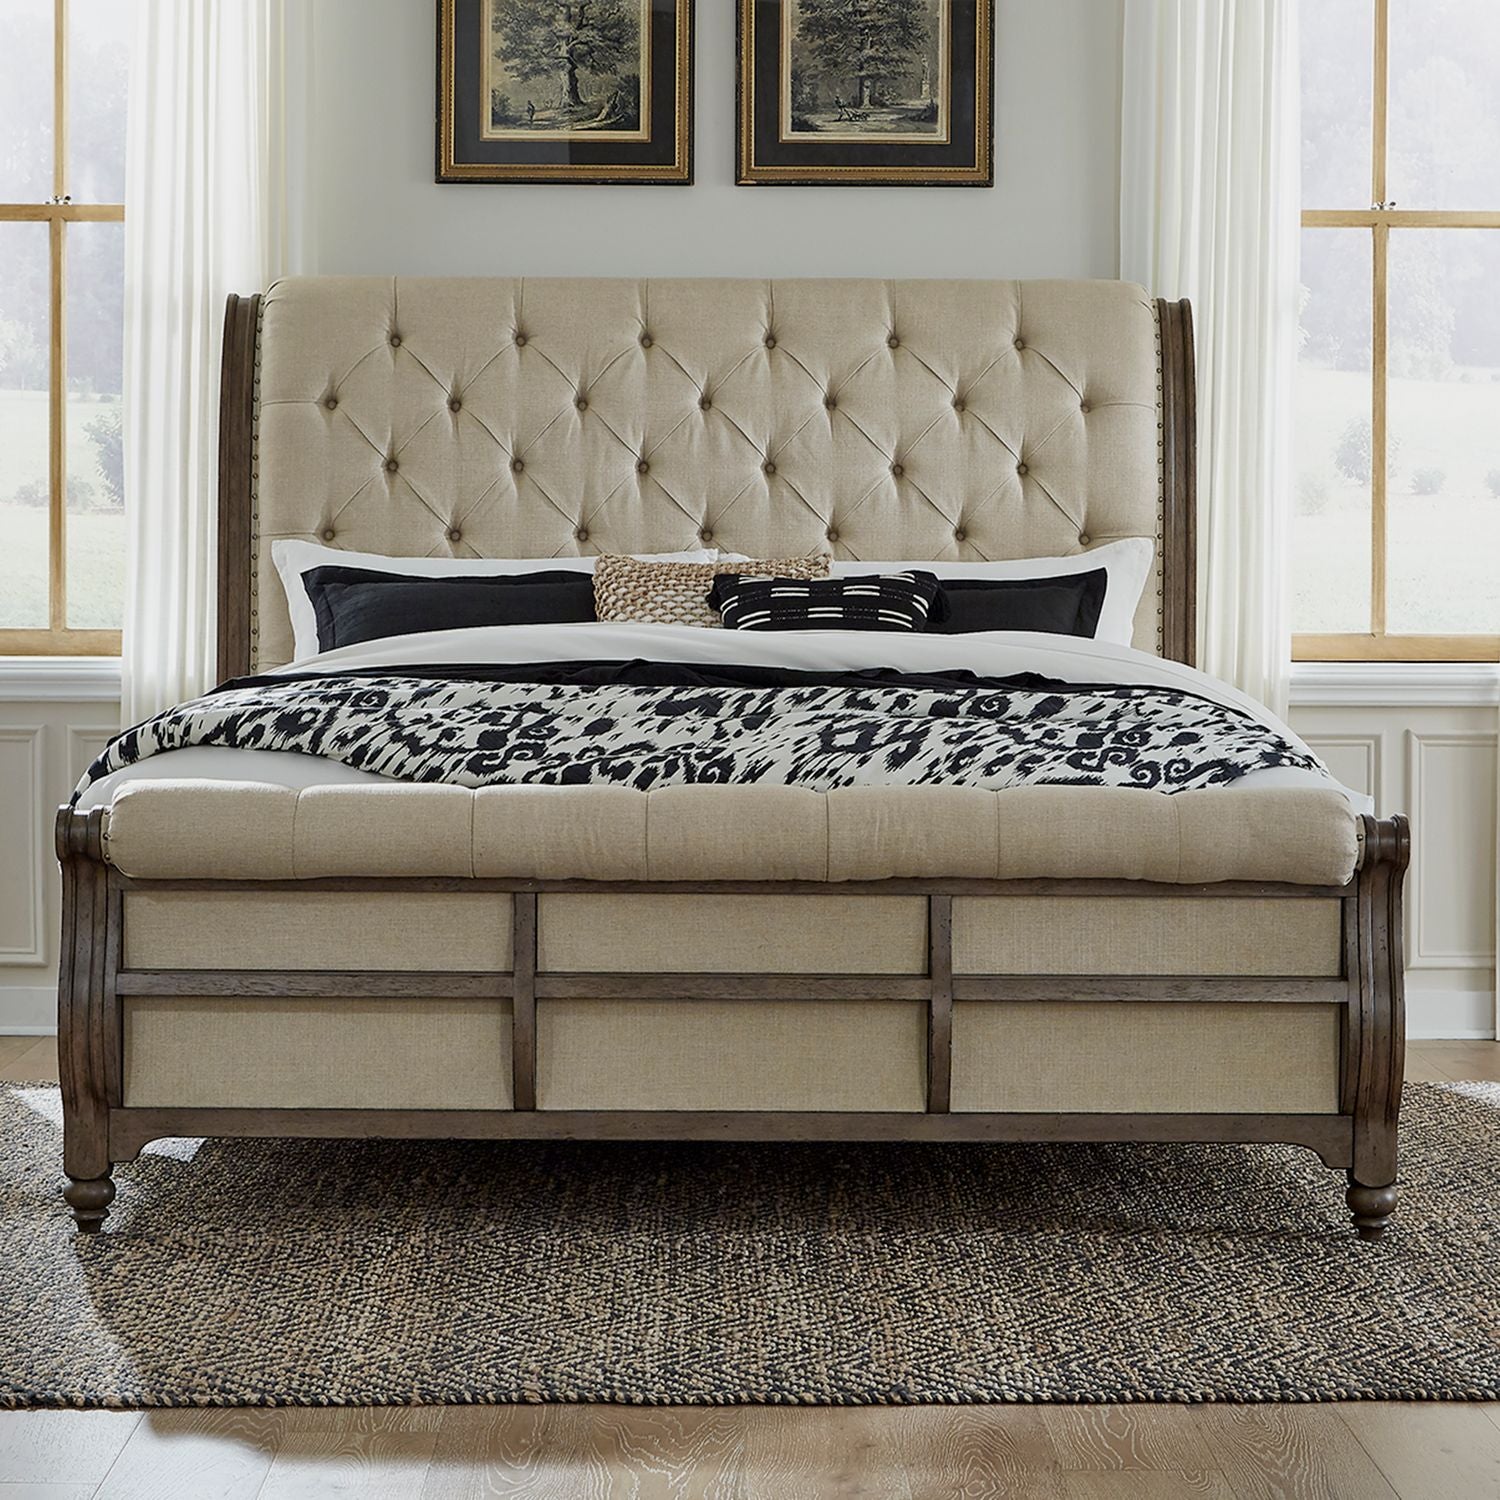 Americana Farmhouse 615-BR Upholstered Sleigh Bedroom Collection from Liberty Furniture